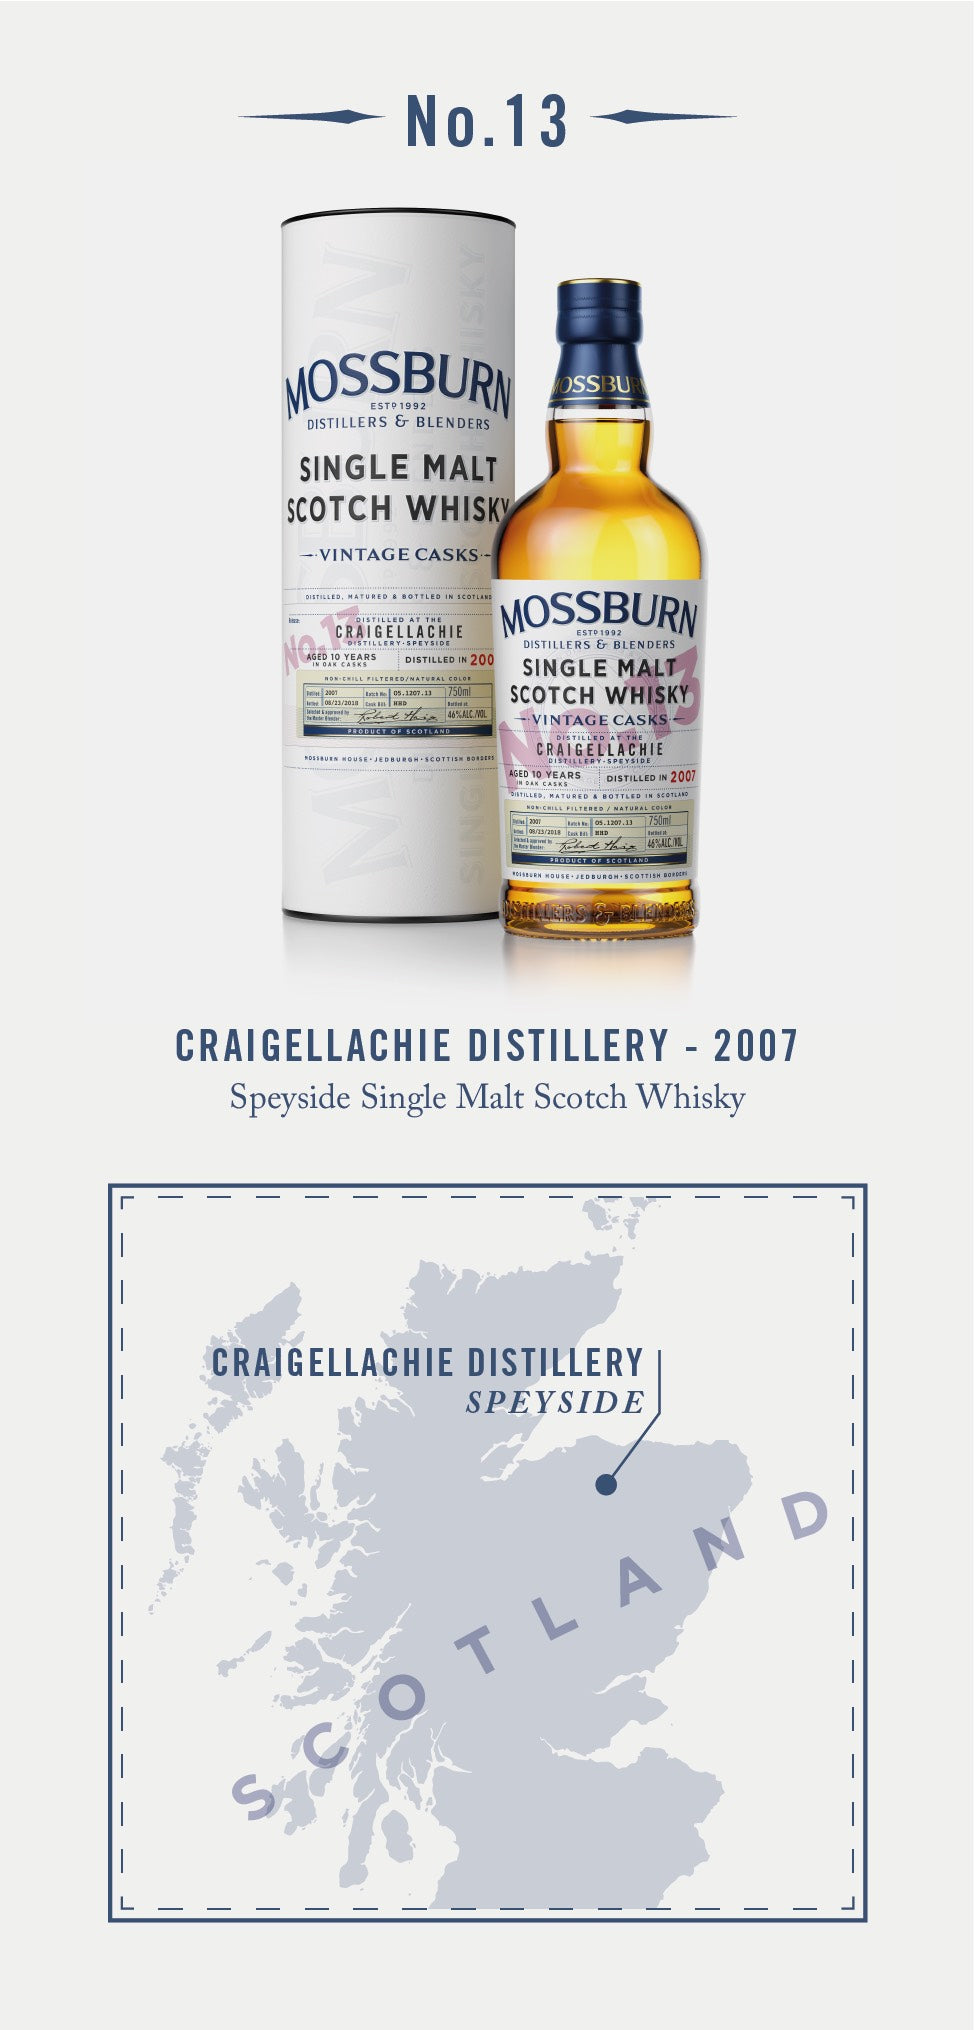 Craigellachie 10 Years Old No. 13 Scotch Whisky by Mossburn Distillers